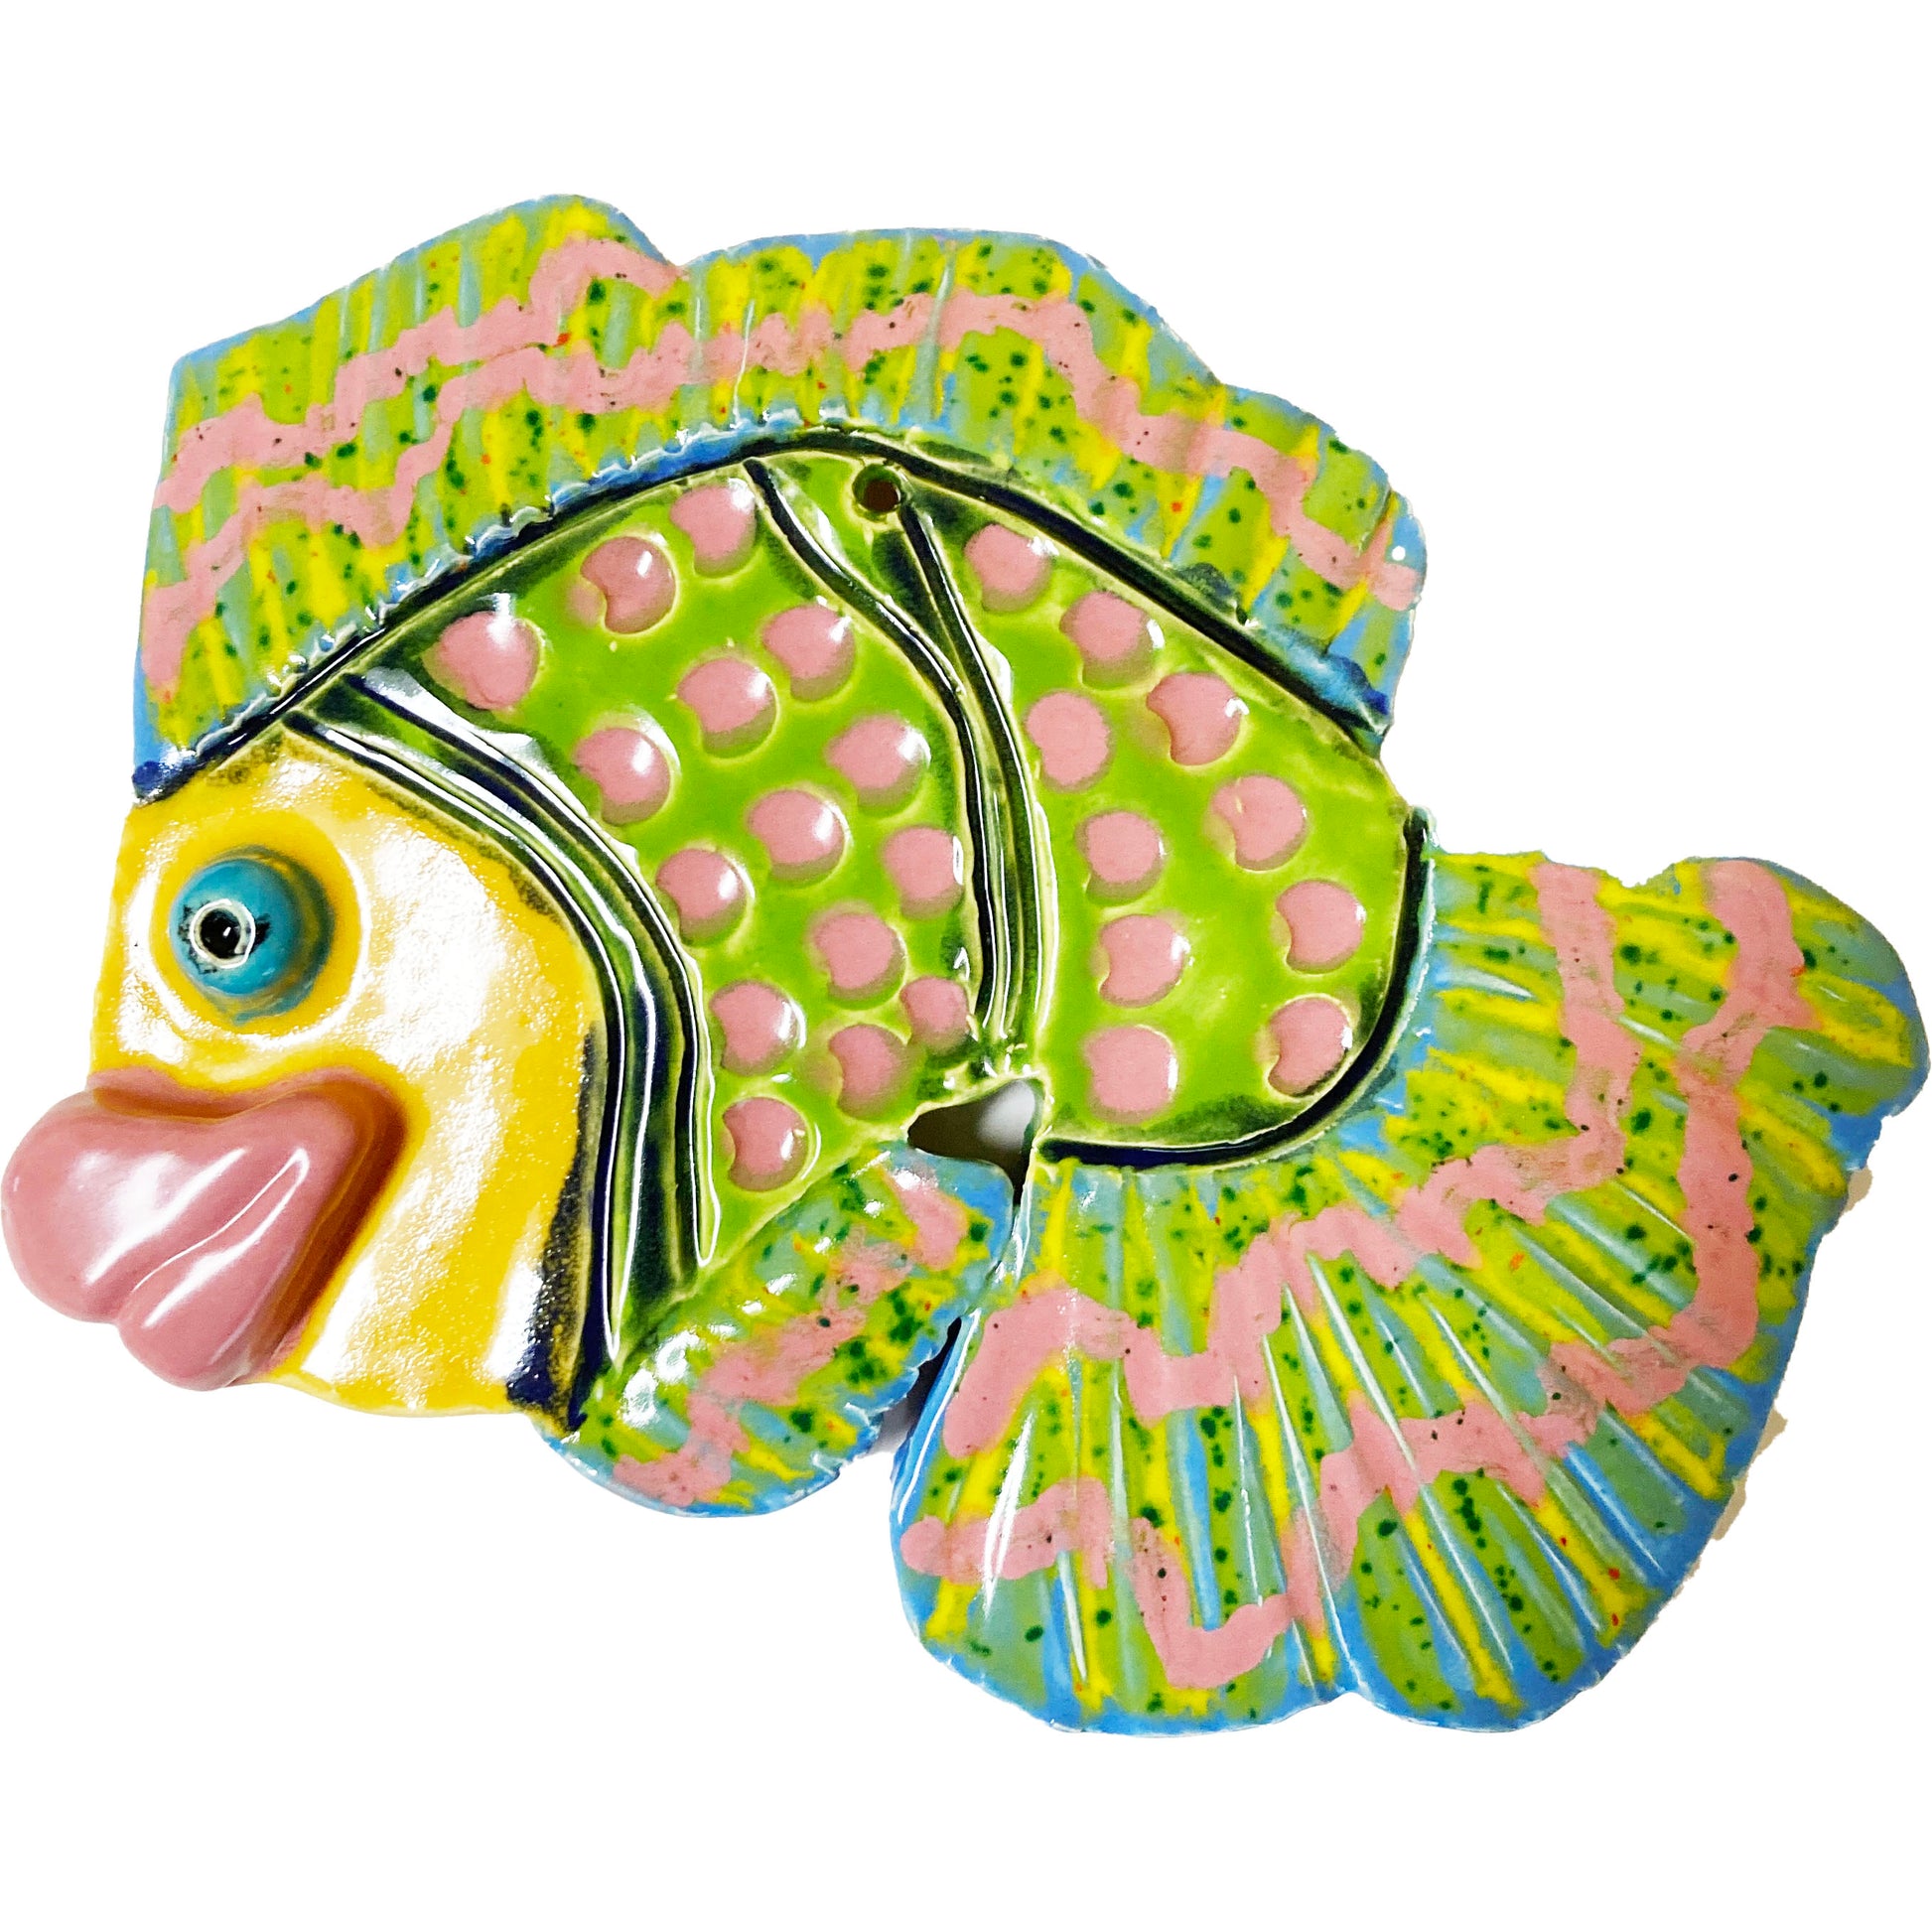 WATCH Resources Art Guild - Ceramic Arts Handmade Clay Crafts Fresh Fish 7-inch x 6-inch Glazed made by Janice Stephens